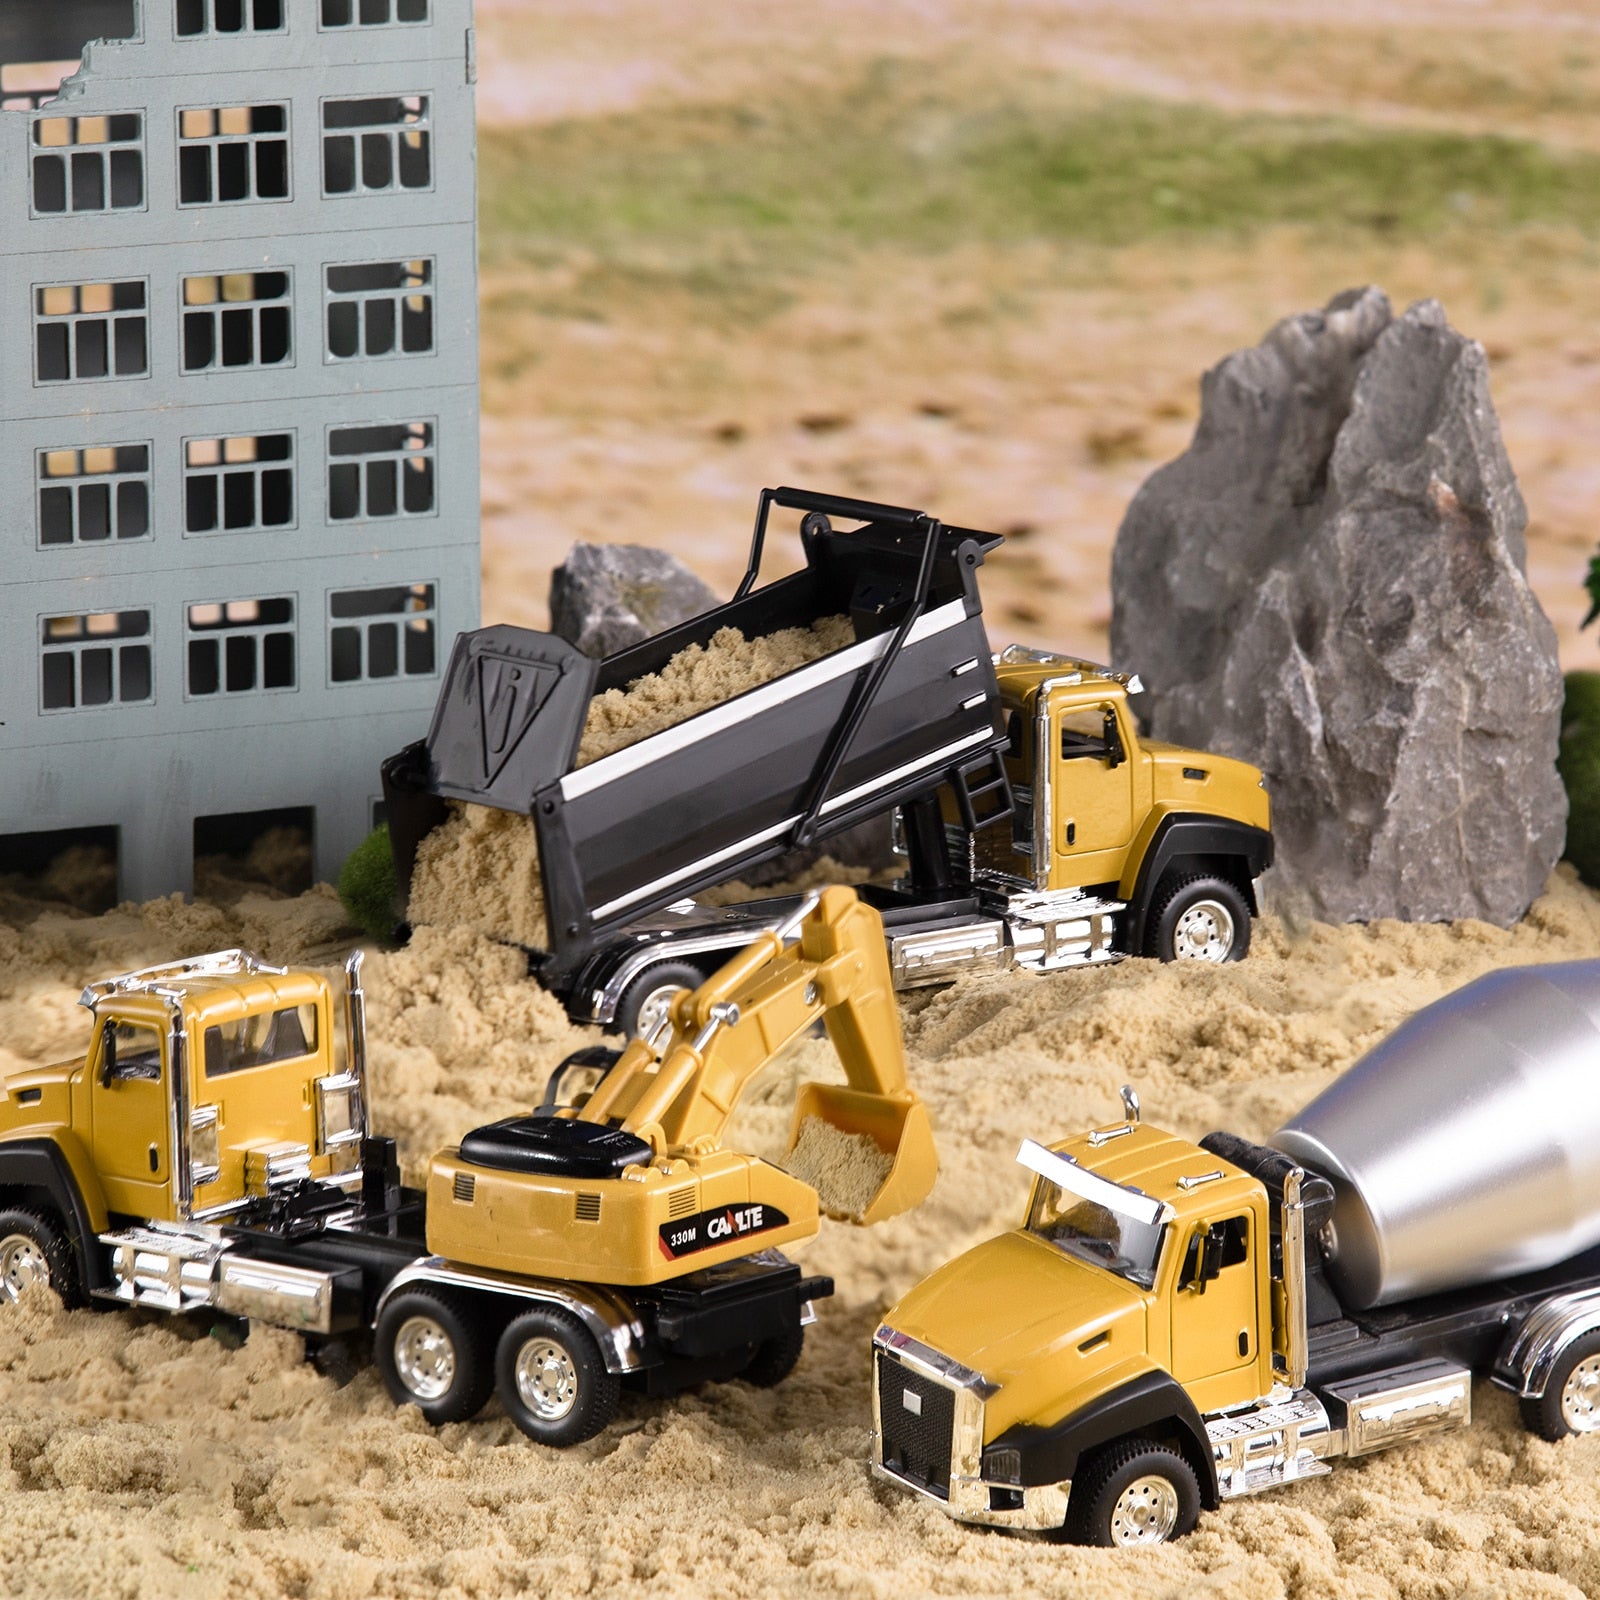 3 Pack of Diecast Engineering Construction Vehicles Dump Digger Mixer Truck 1/50 Scale Metal Model Cars Pull Back Car kids Toys  BX1310 CF18-C3S Official JT Merch